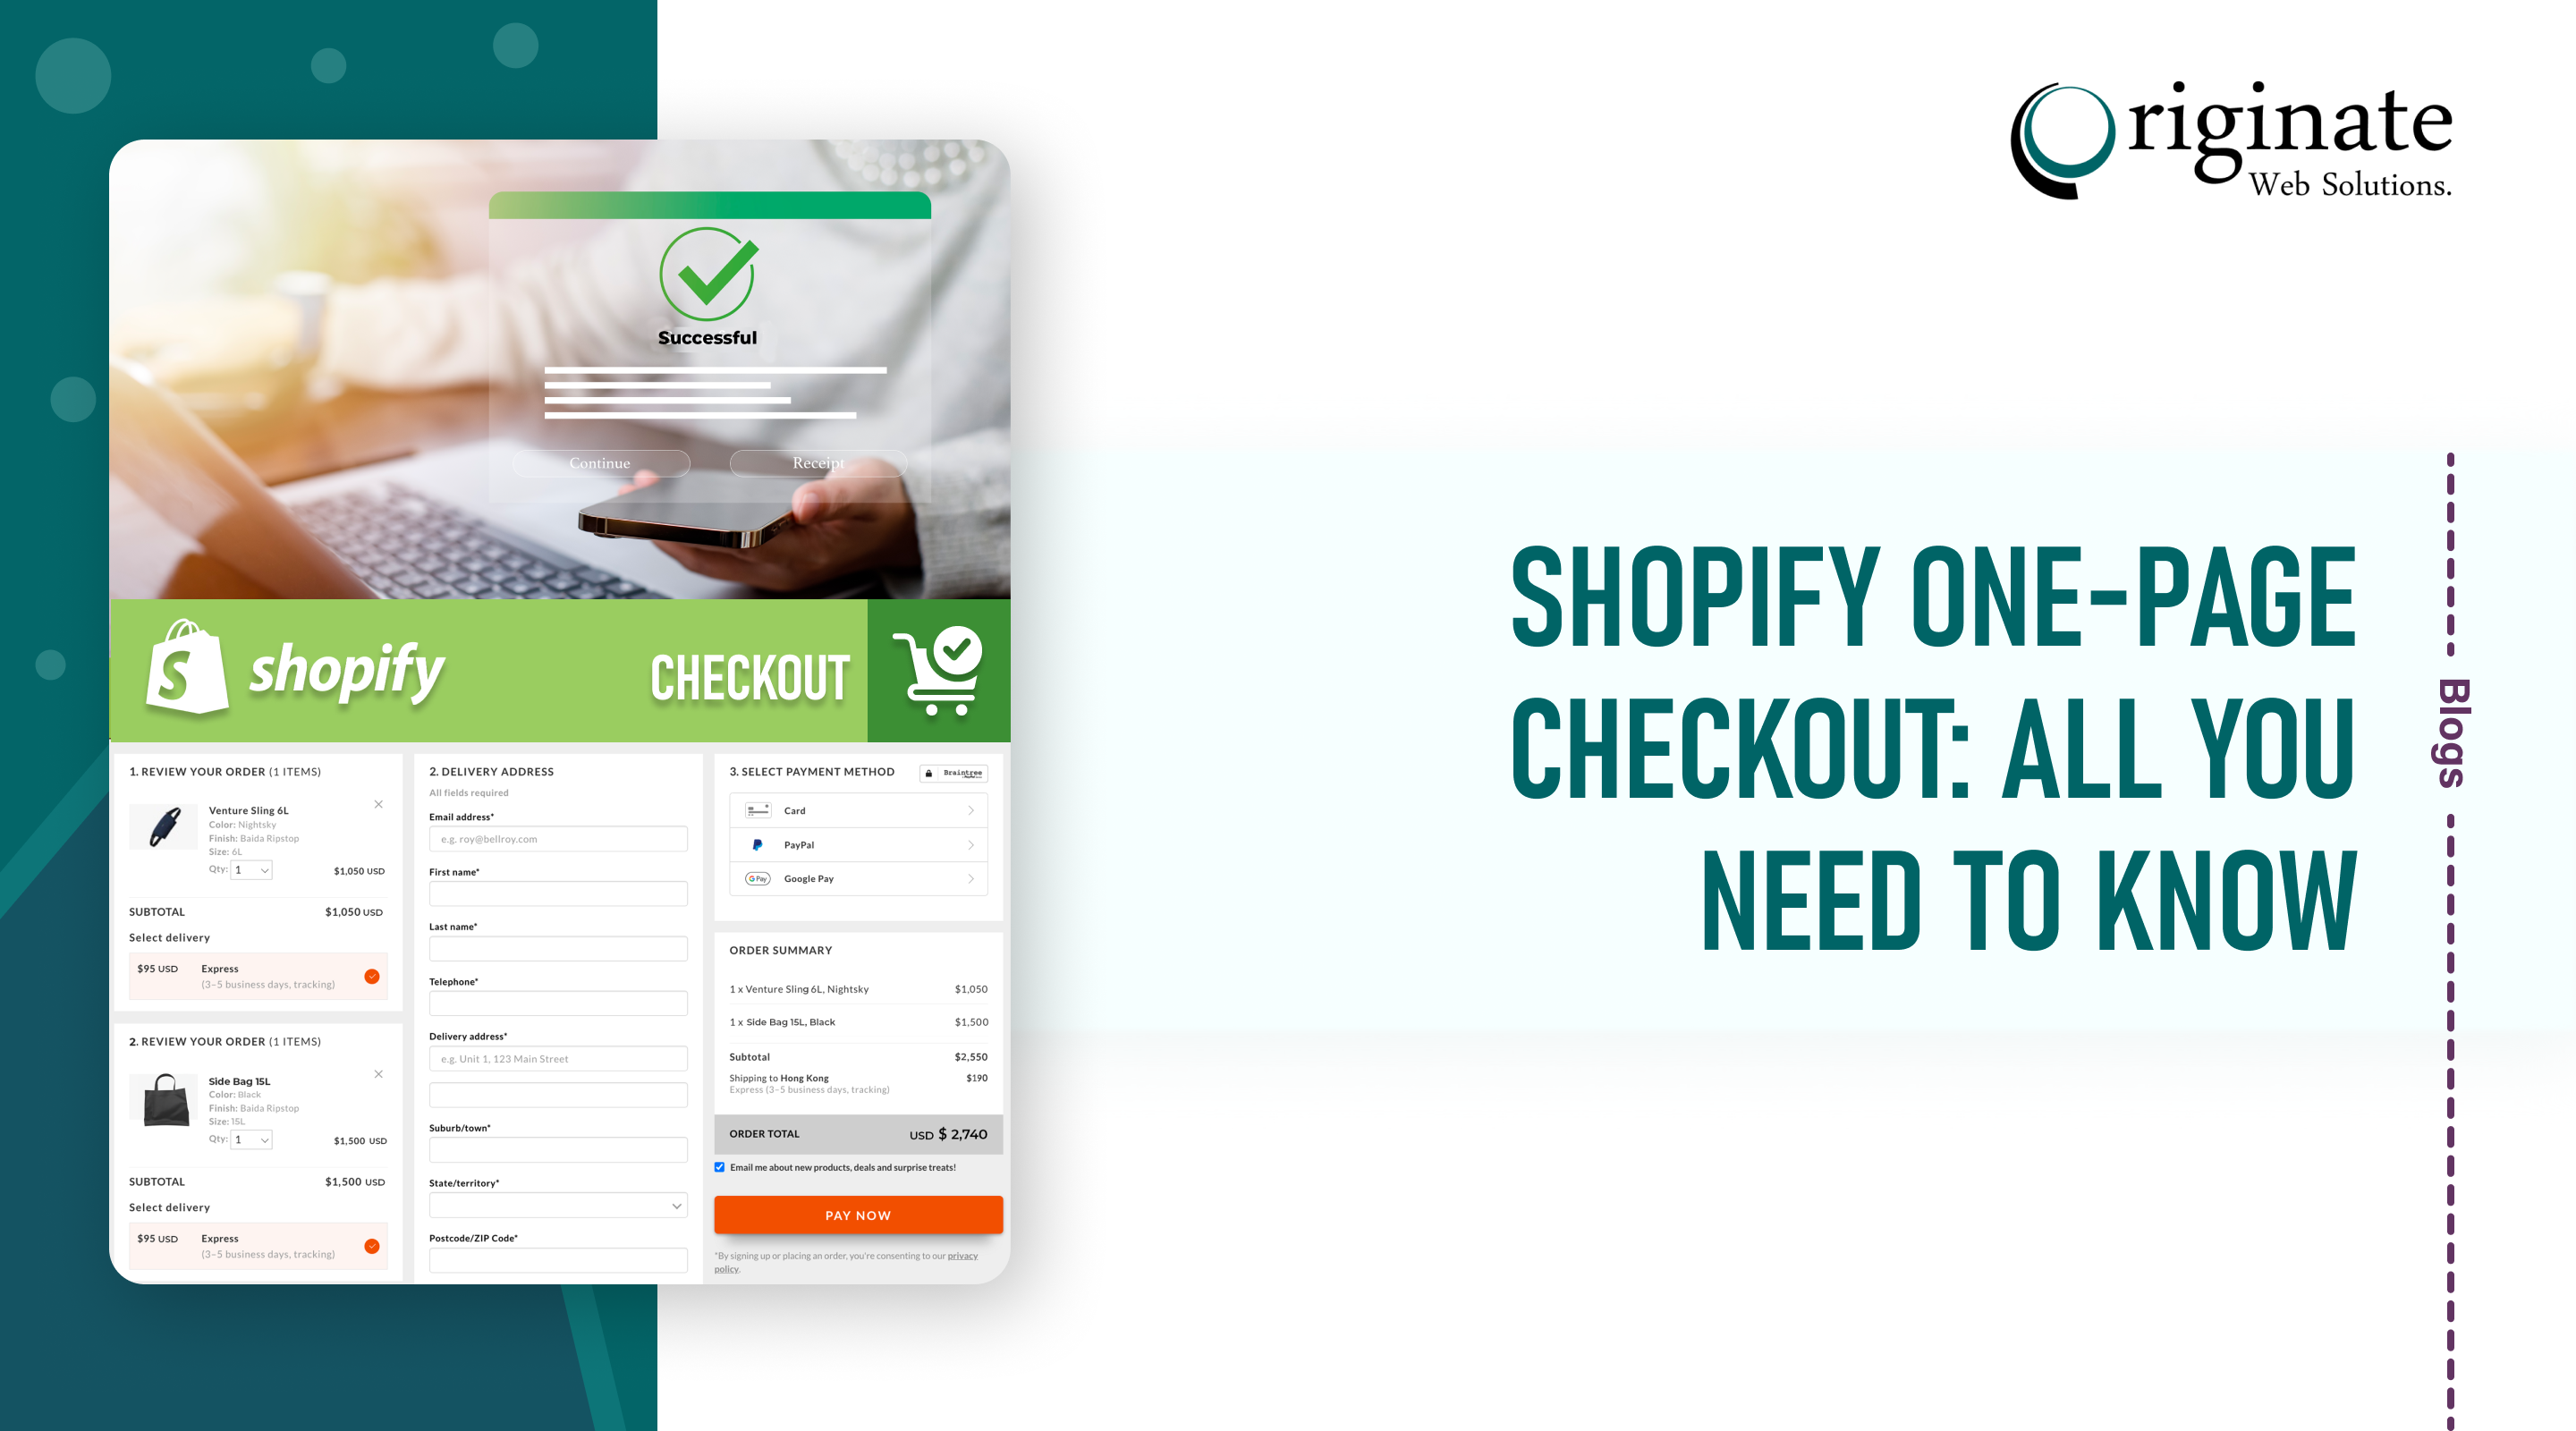 Shopify One-page Checkout: All You Need to Know